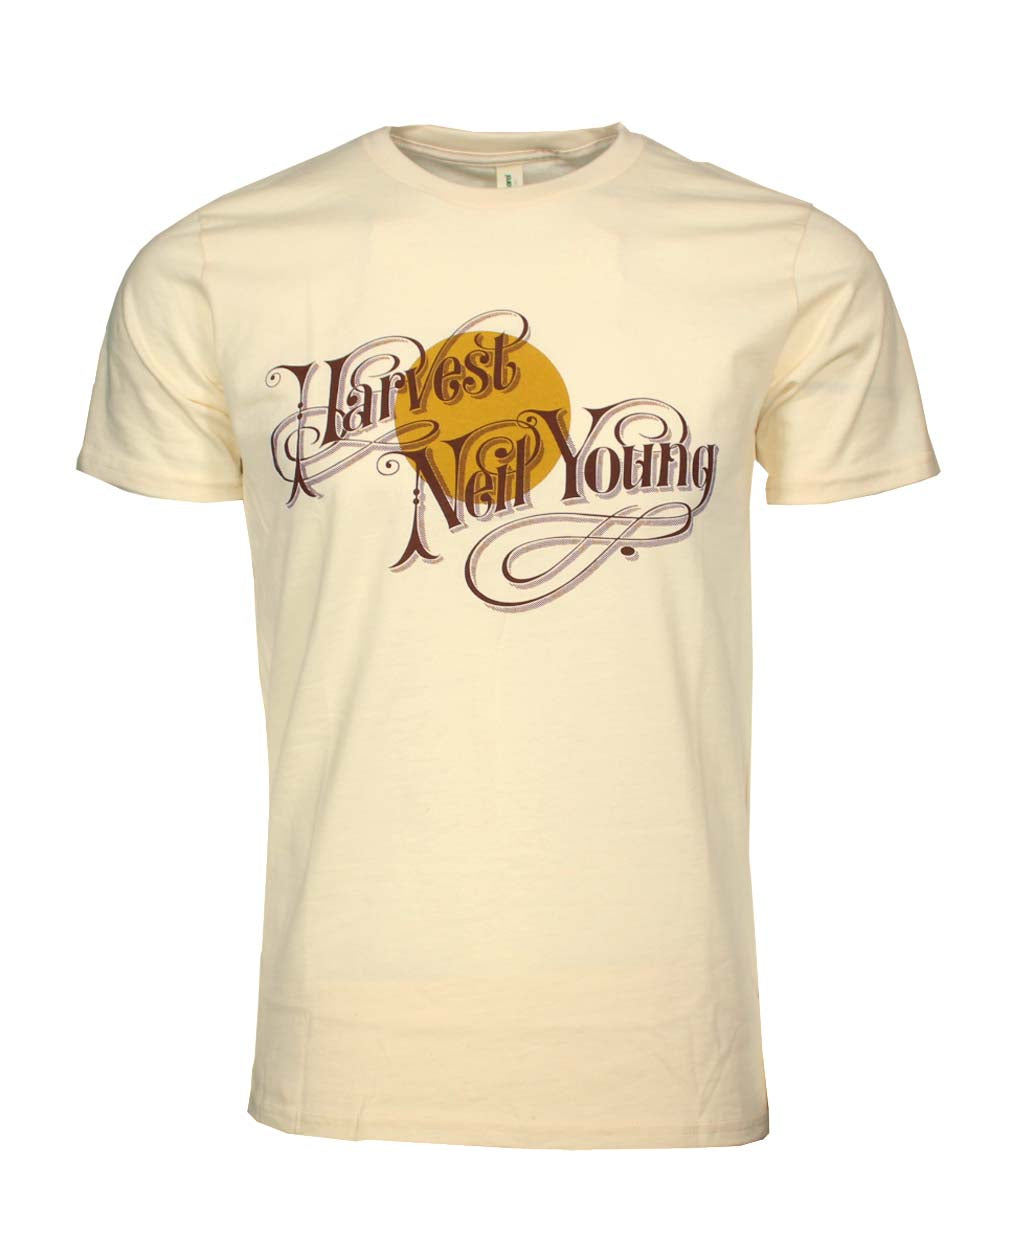 Neil Young Band Tee